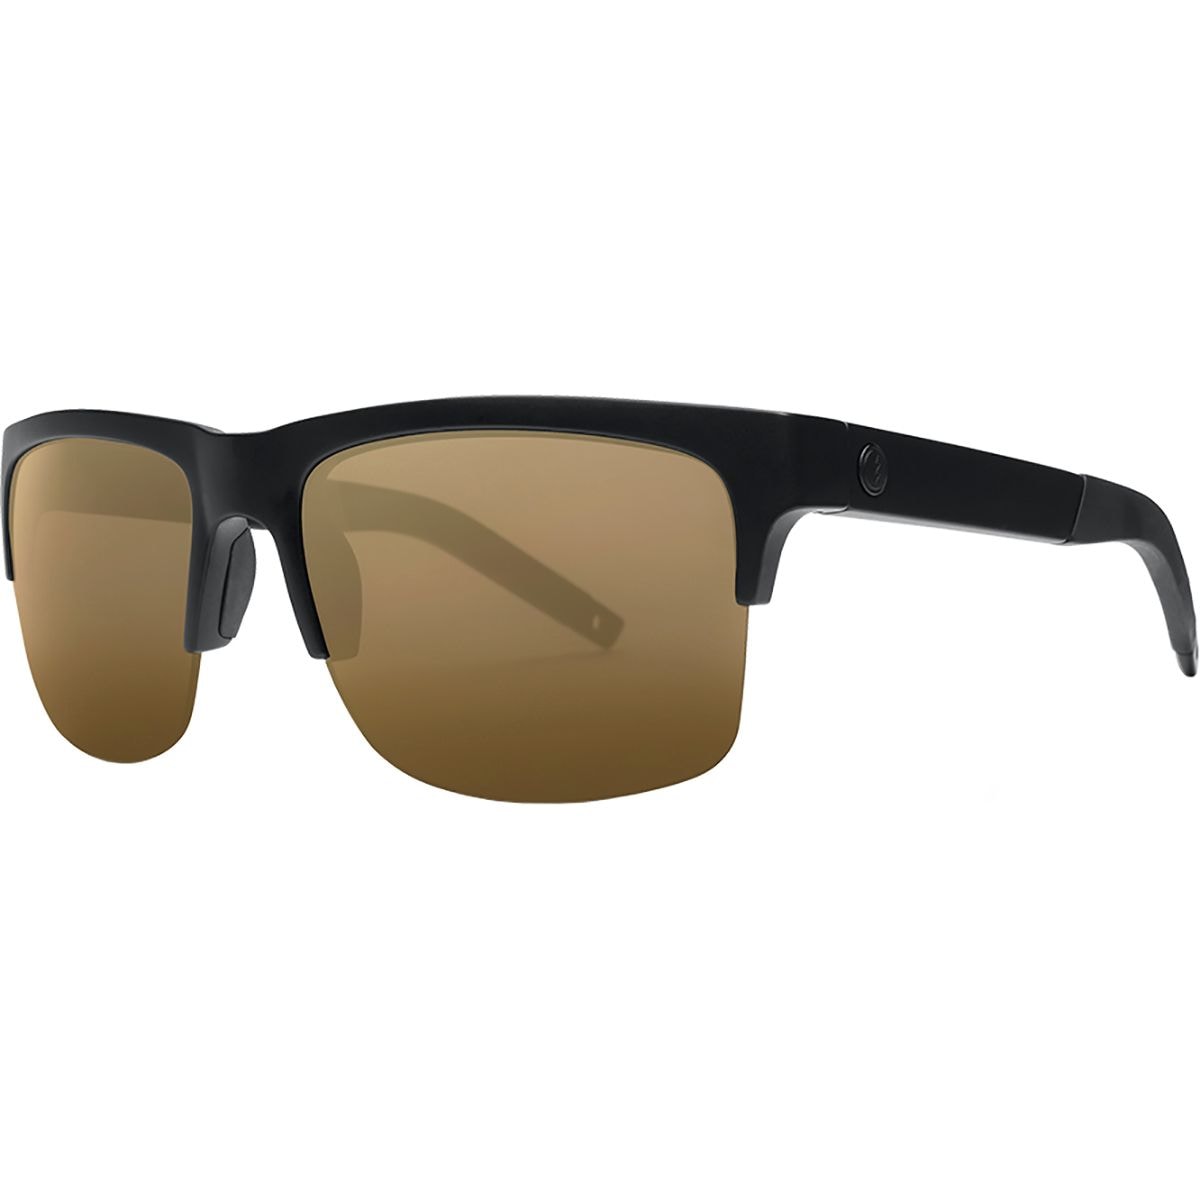 Electric Knoxville Pro Polarized Sunglasses